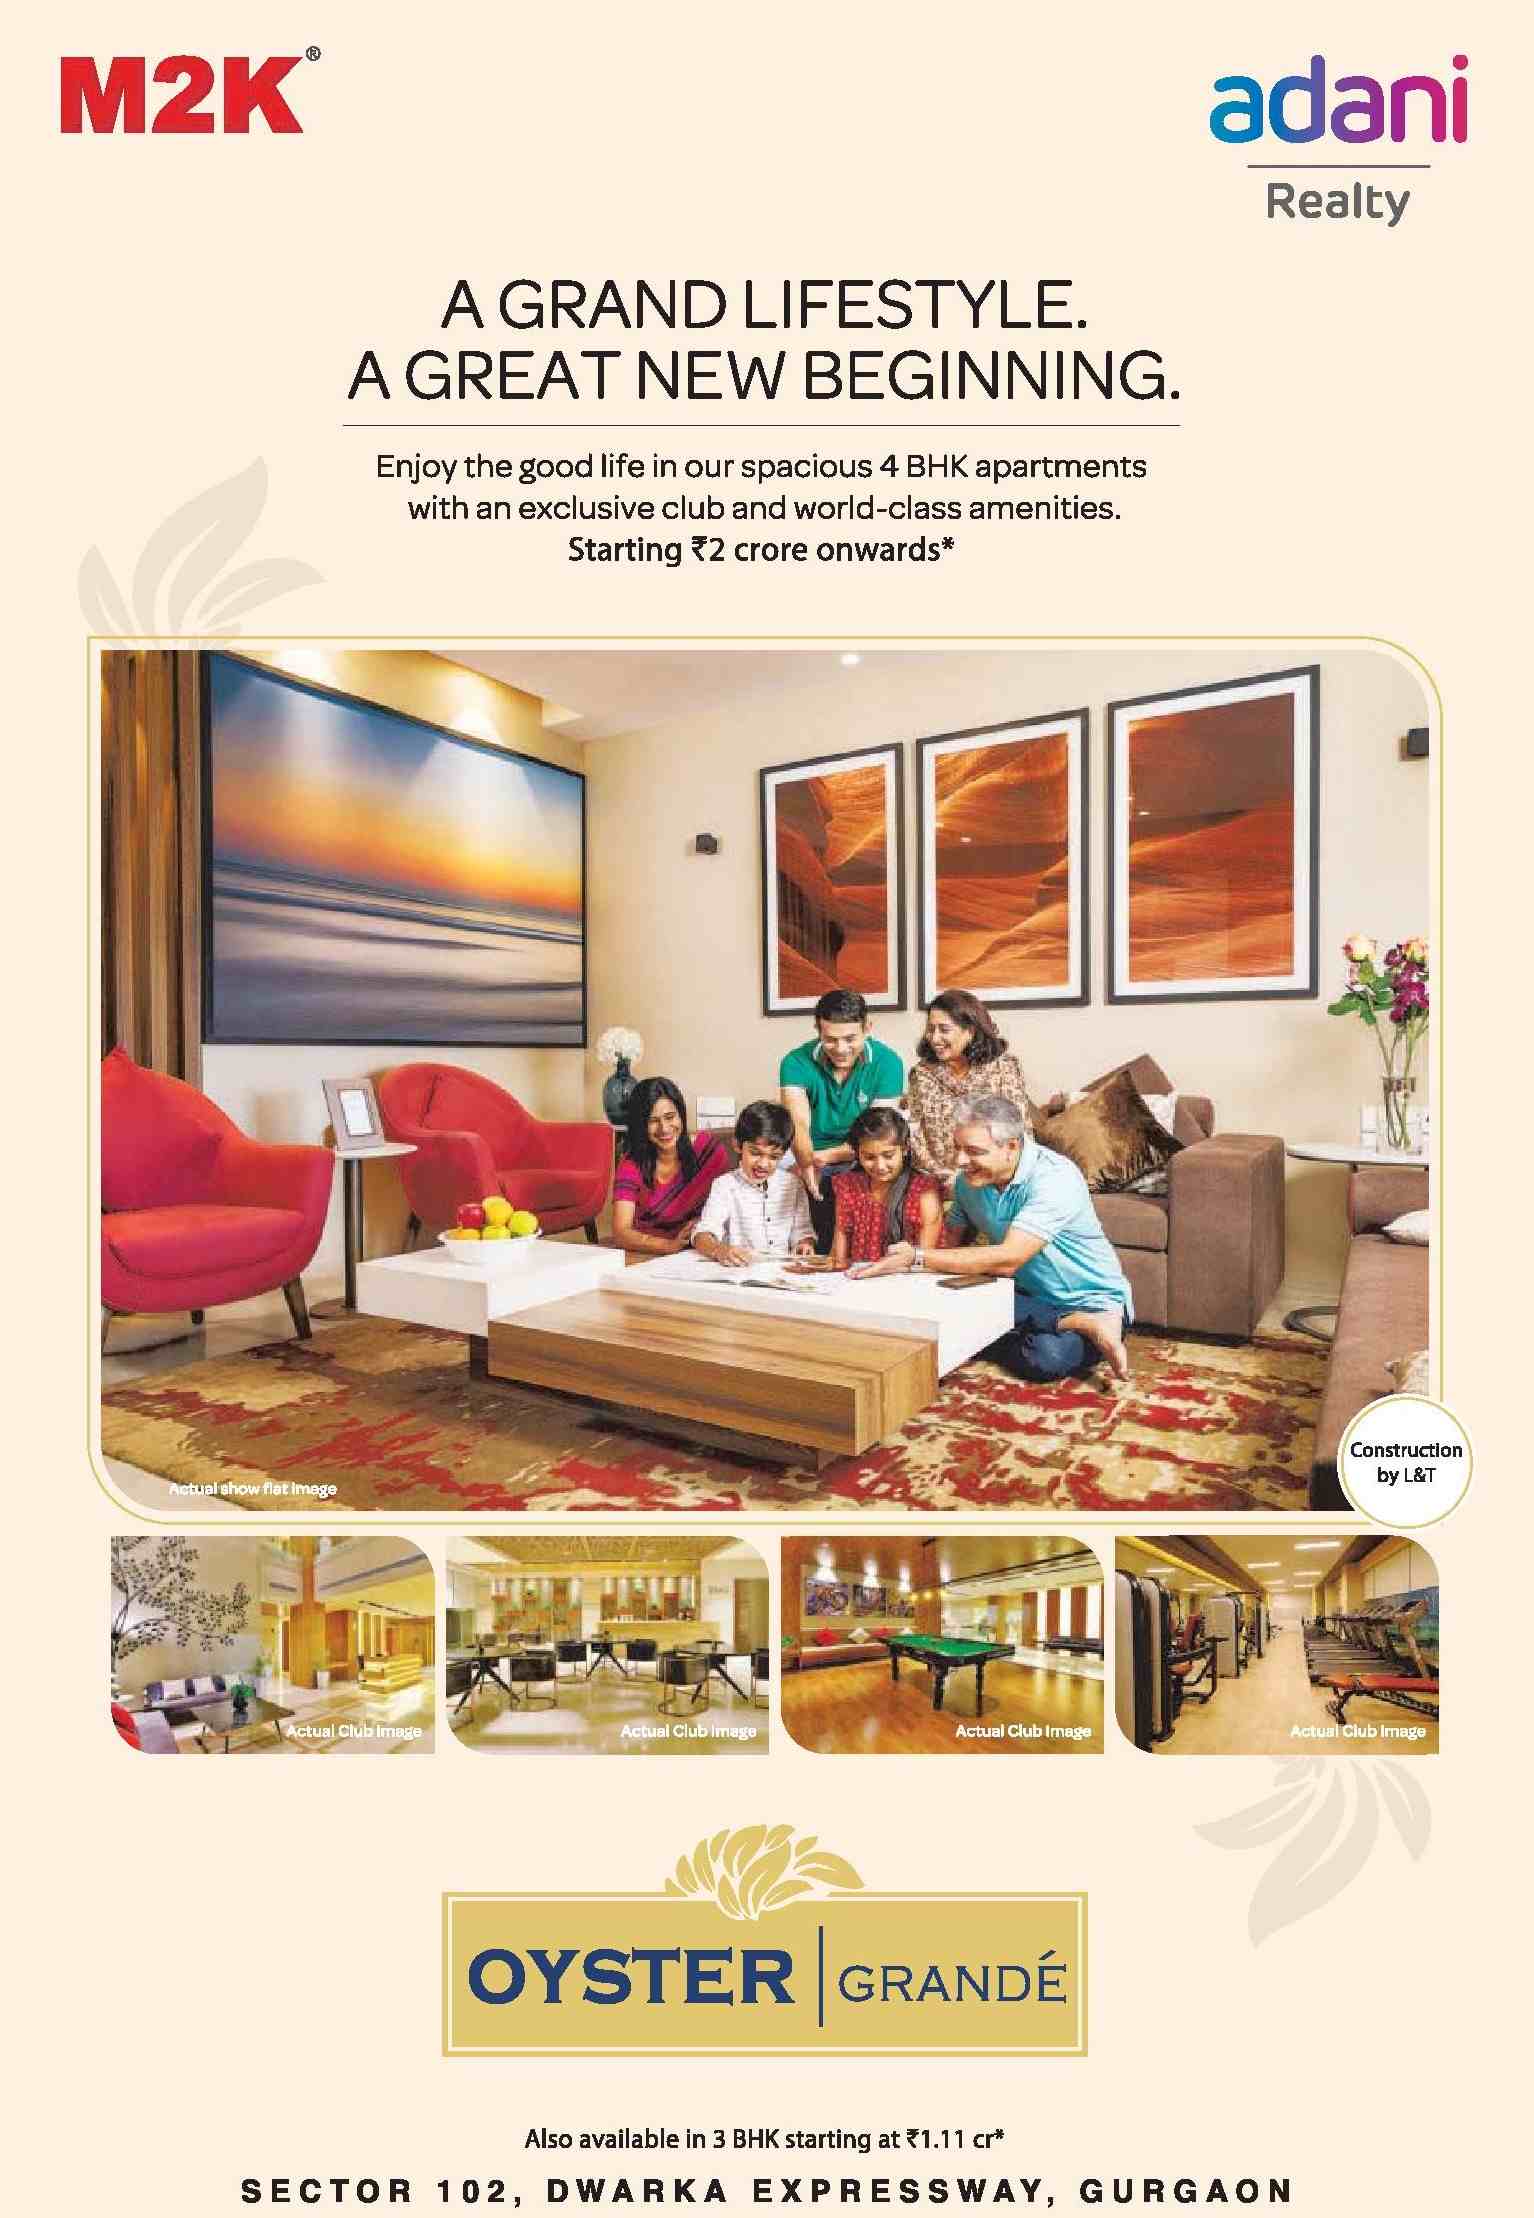 Enjoy good life with exclusive club & world-class amenities at Adani M2K Oyster Grande in Gurgaon Update